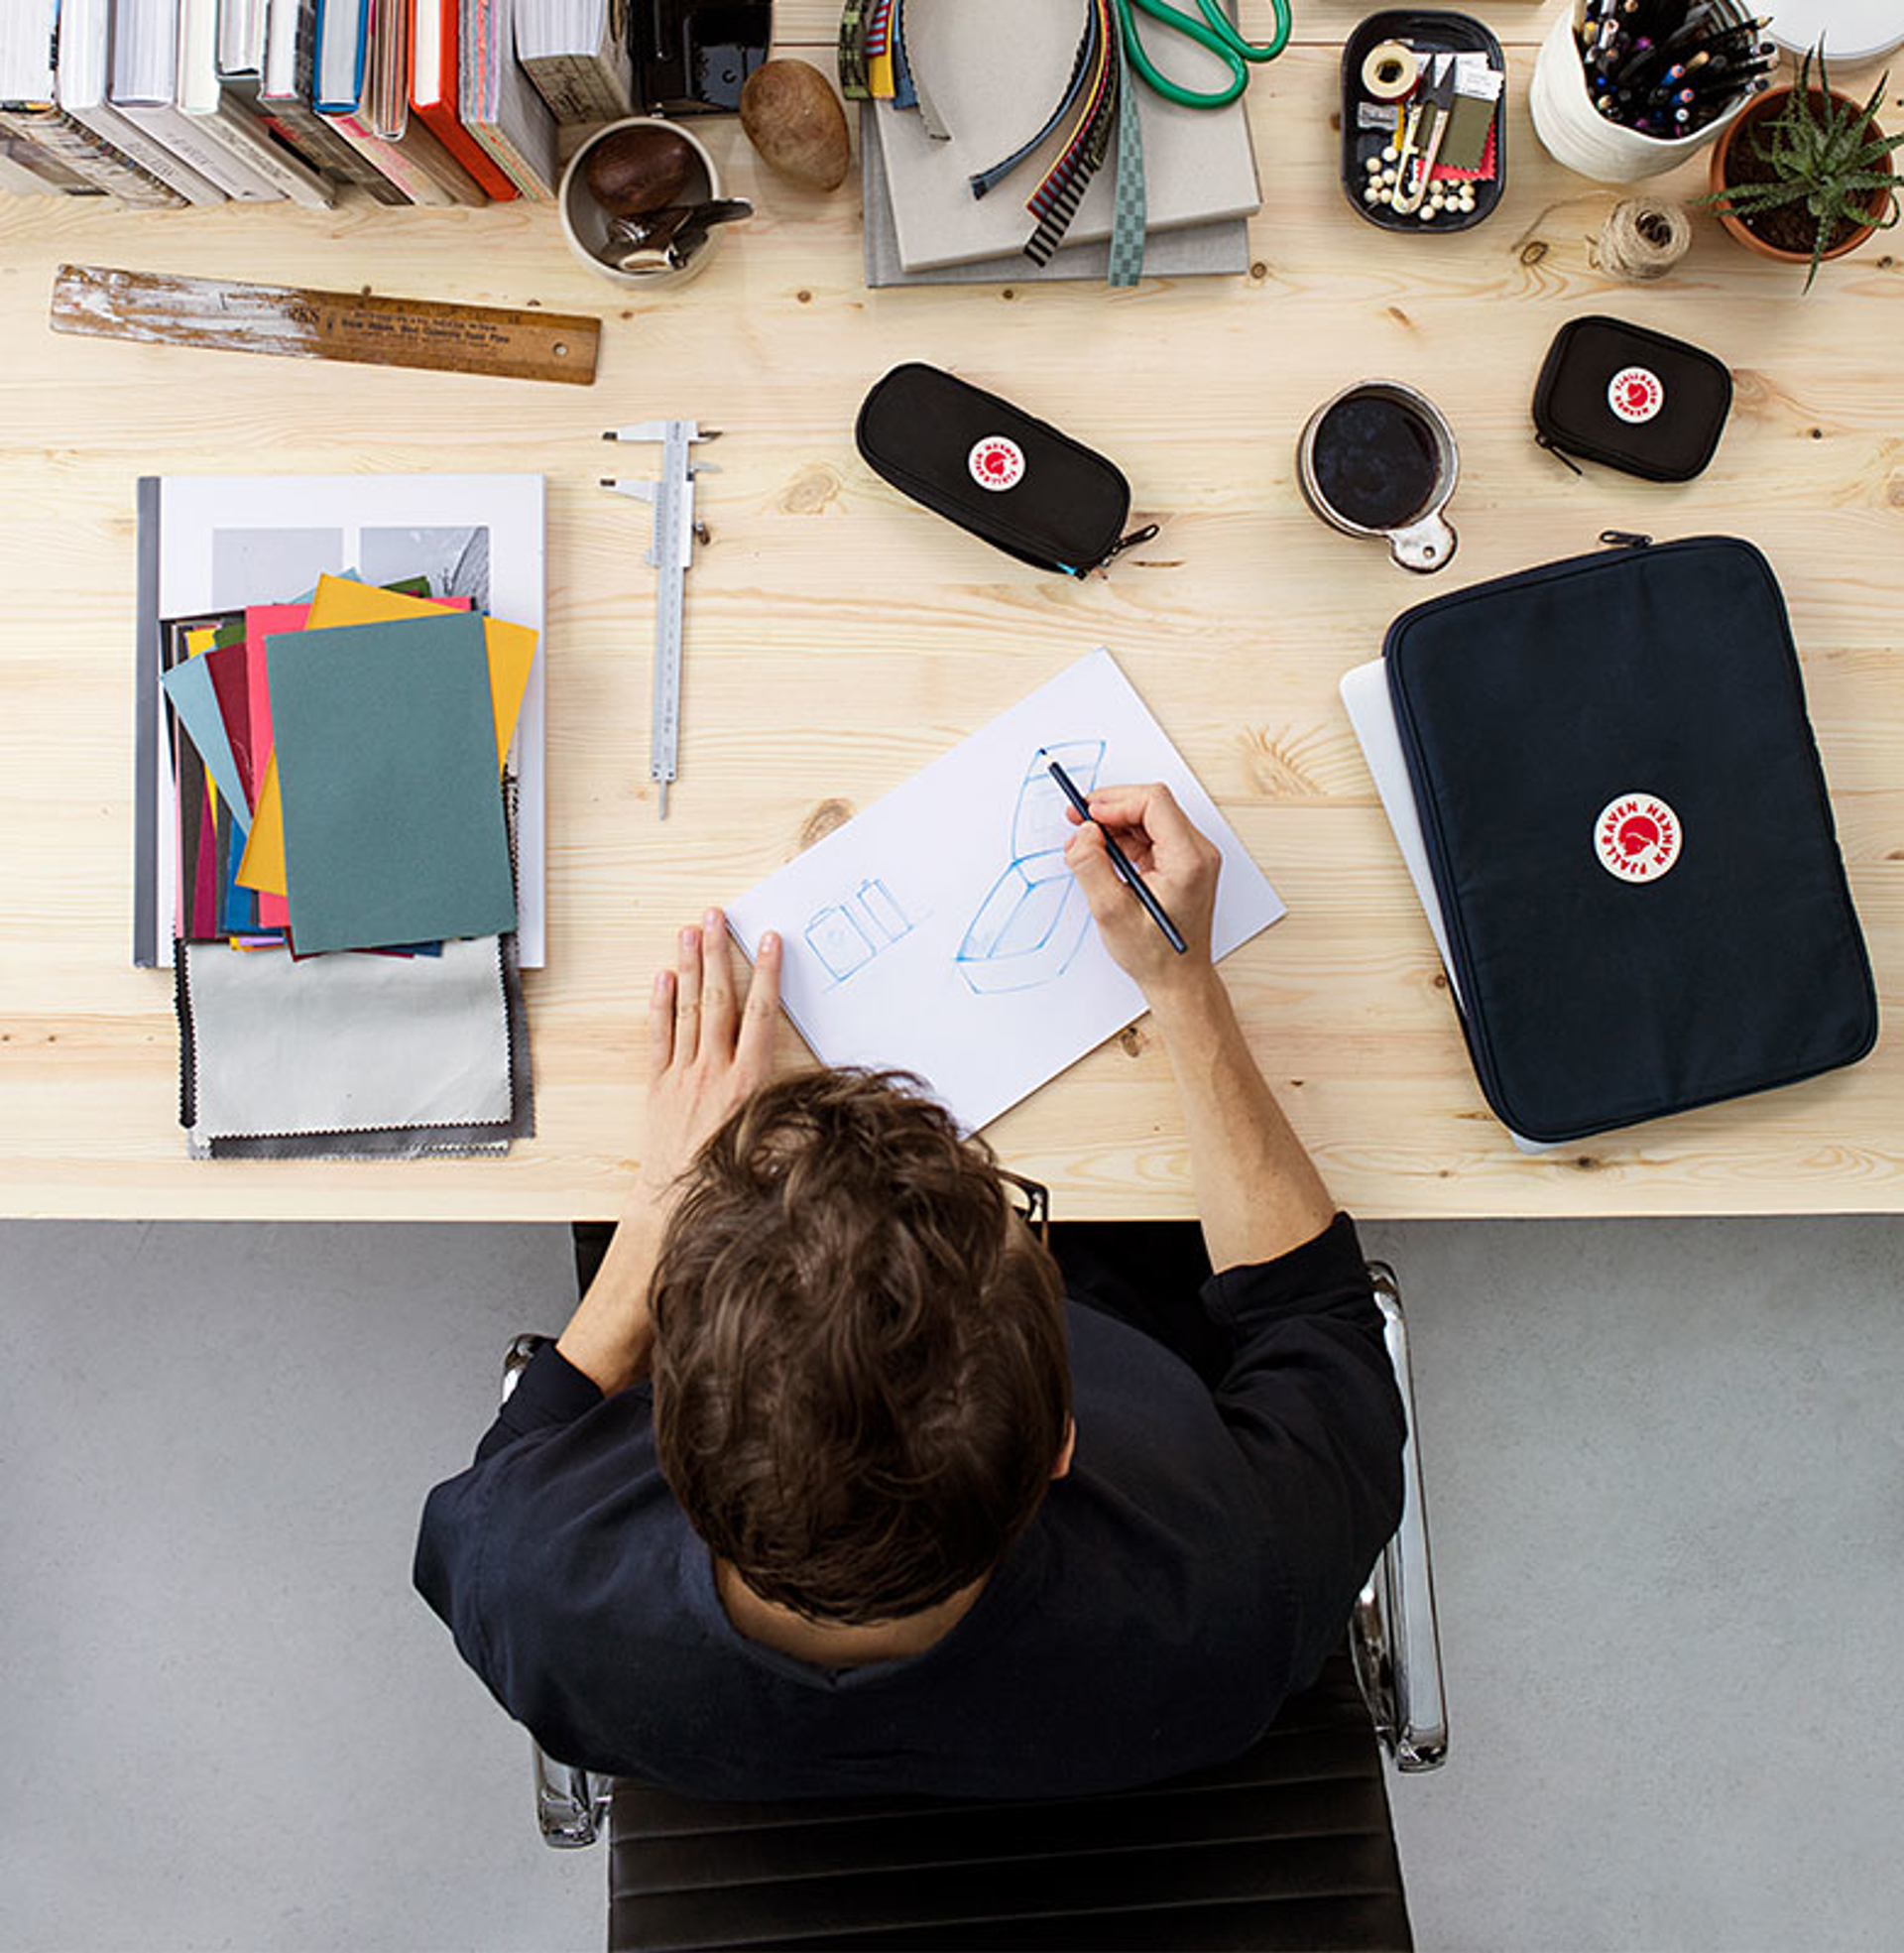 man sitting a workstation with fjallraven gear around him while he sketches